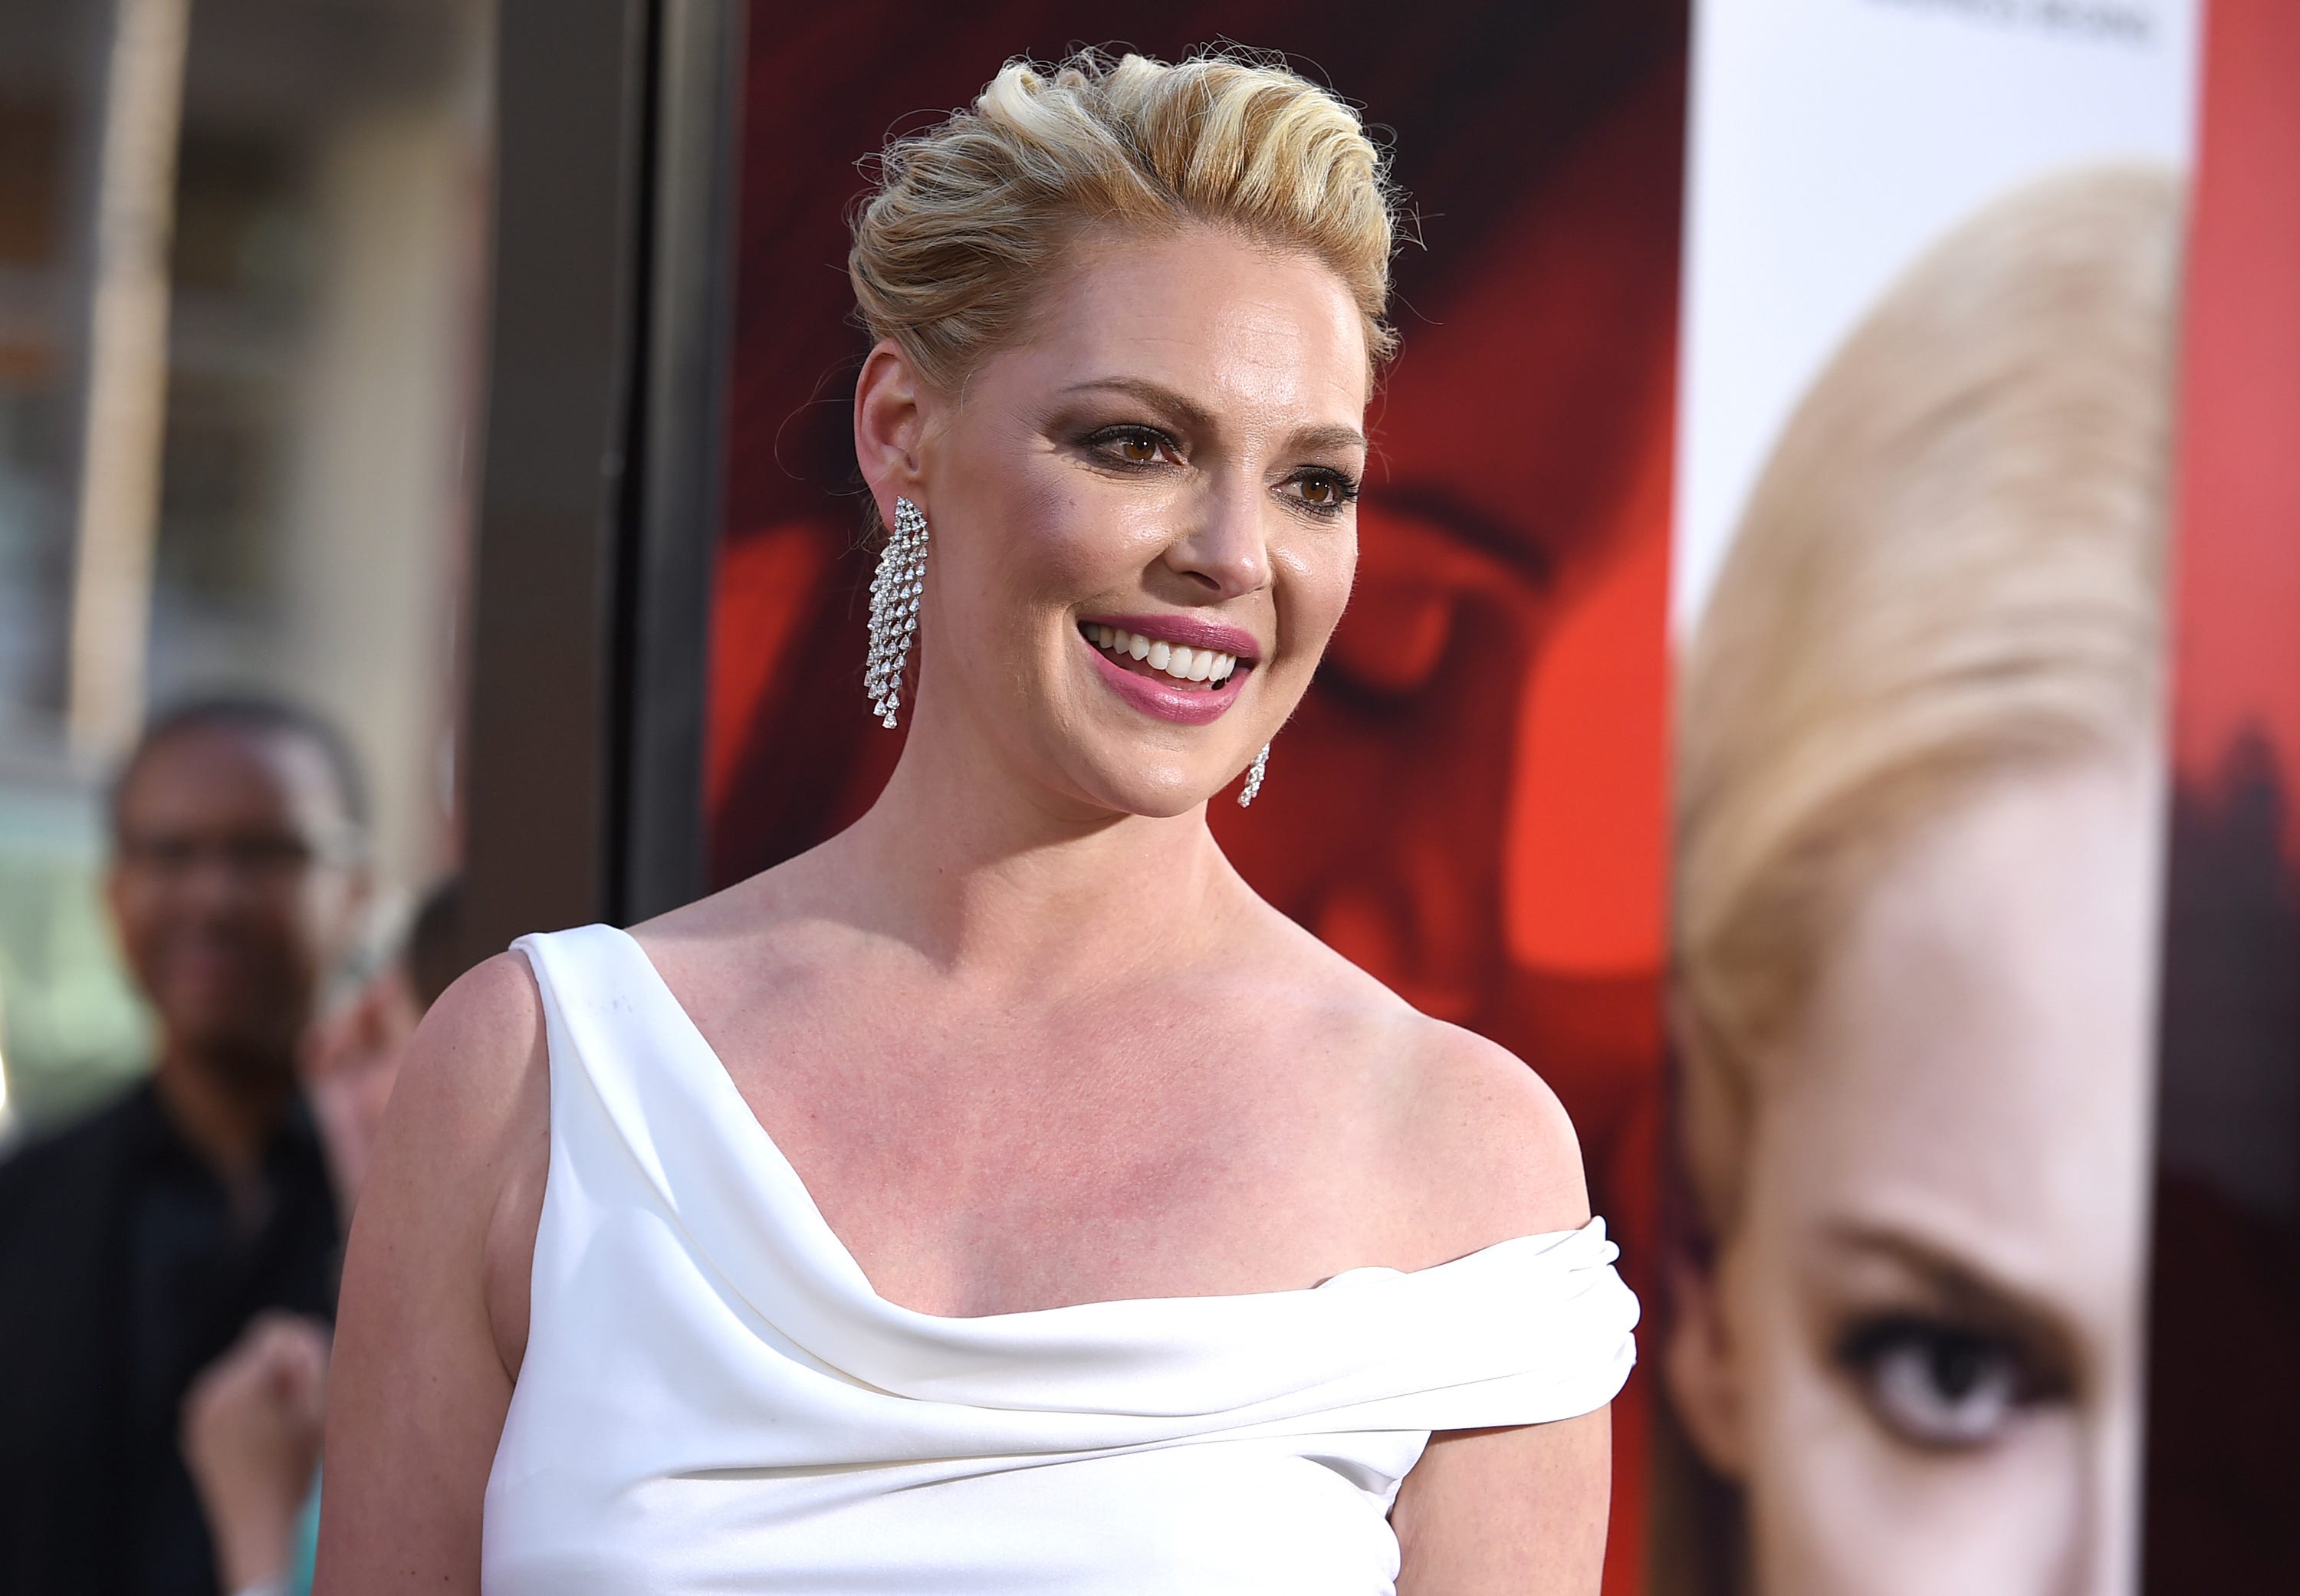 Katherine Heigl shows off her 14-month post-baby weight loss journey